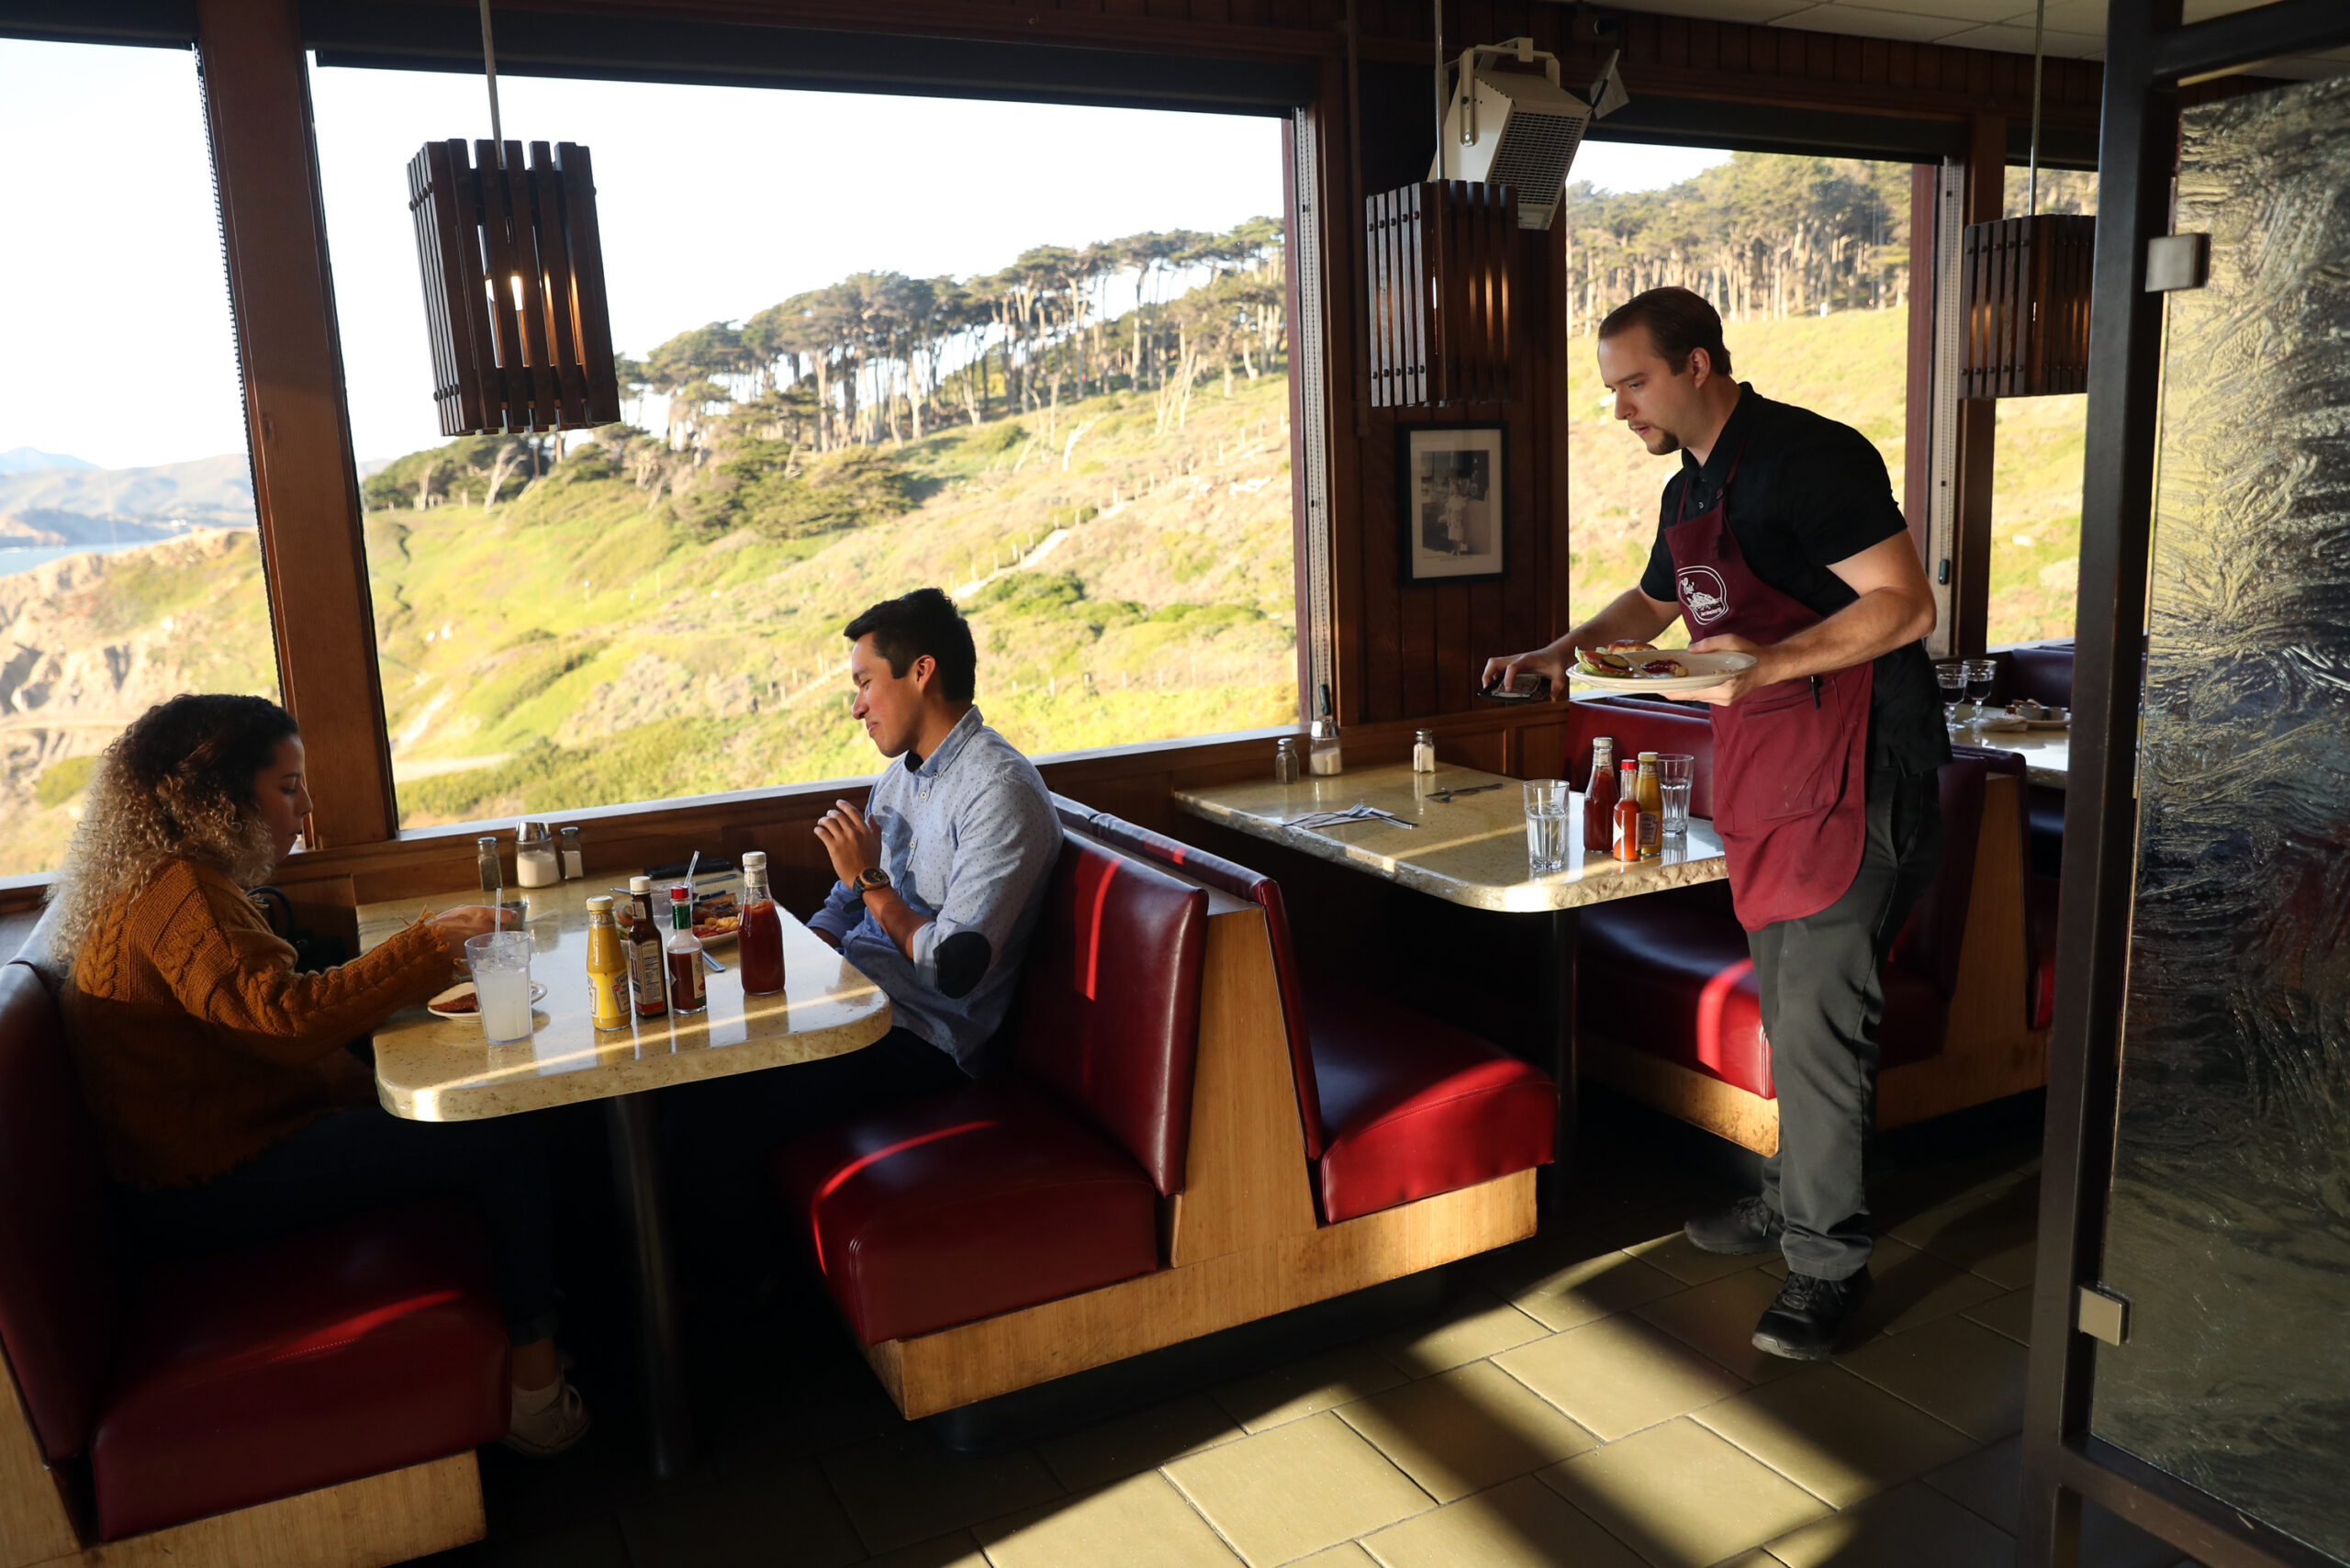 A new restaurant may open in Louis’ clifftop location in San Francisco